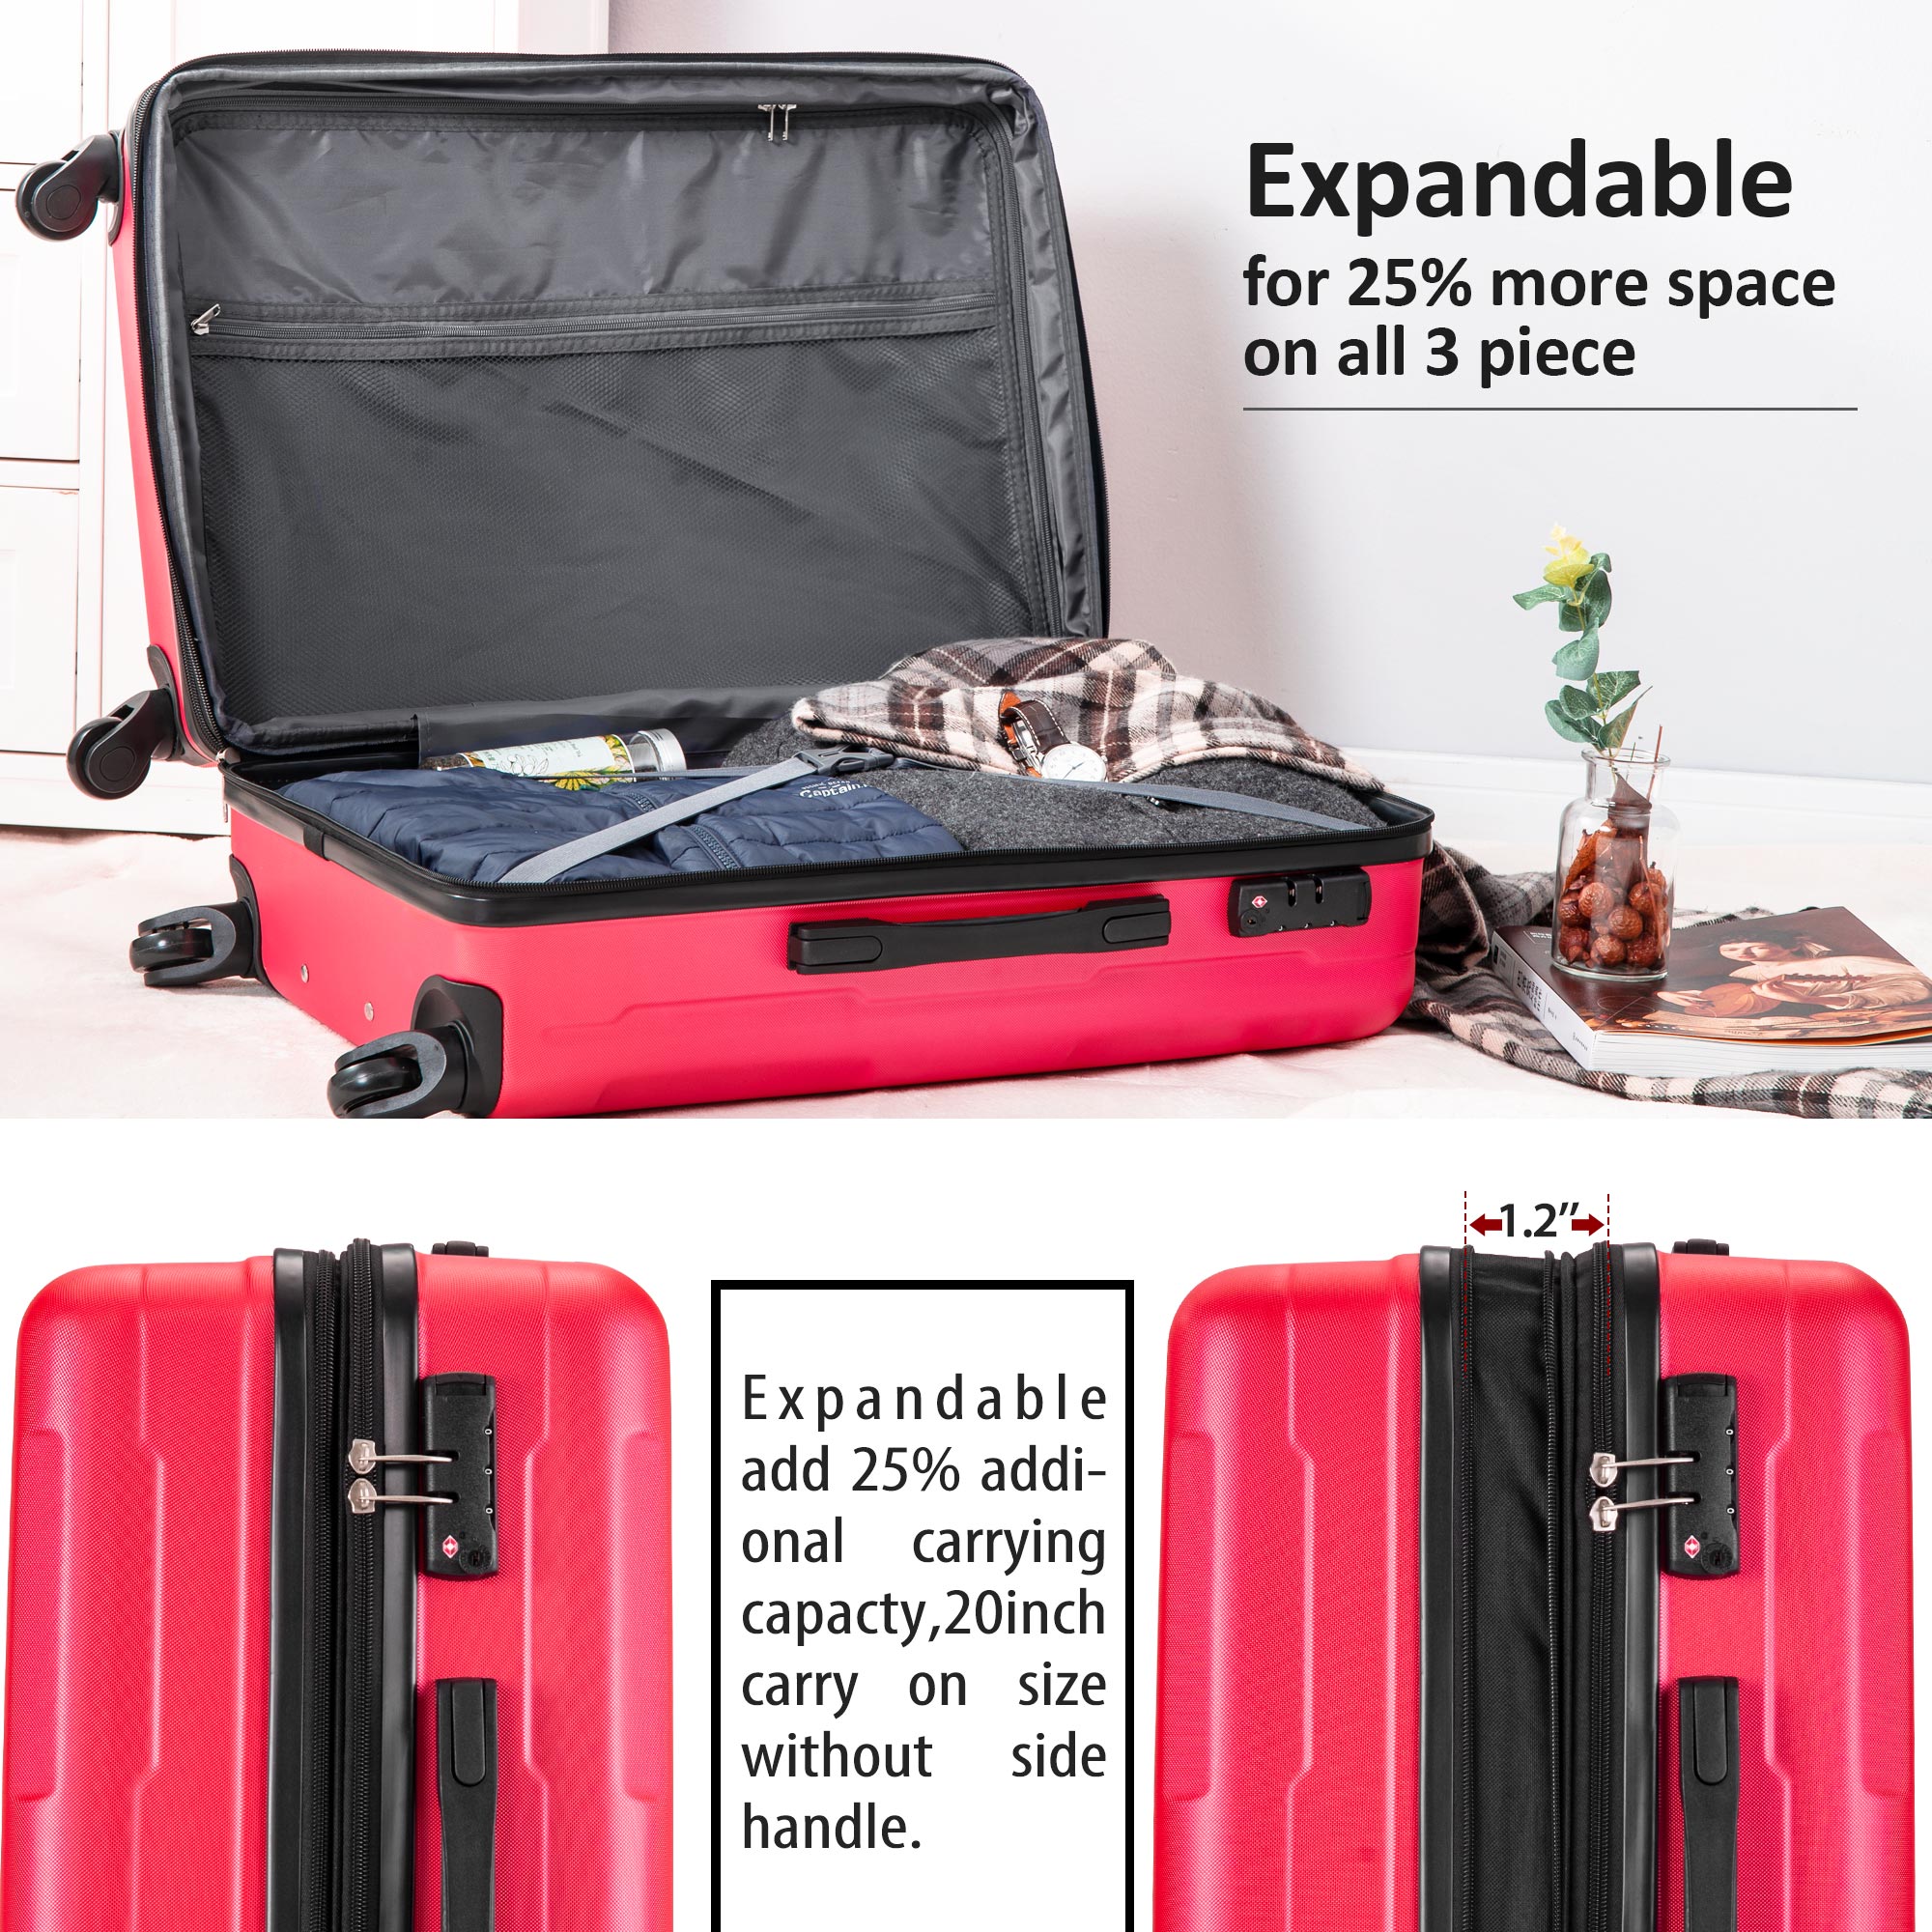 SEGMART Expandable Luggage Sets of 3, 3-Piece Lightweight Hardside 4-Wheel Spinner Luggage Set: 20"/ 24''/ 28" Carry-On Checked Suitcase, Carry on Suitcase with TSA Lock for Traveling, Red, S6564 - image 2 of 8